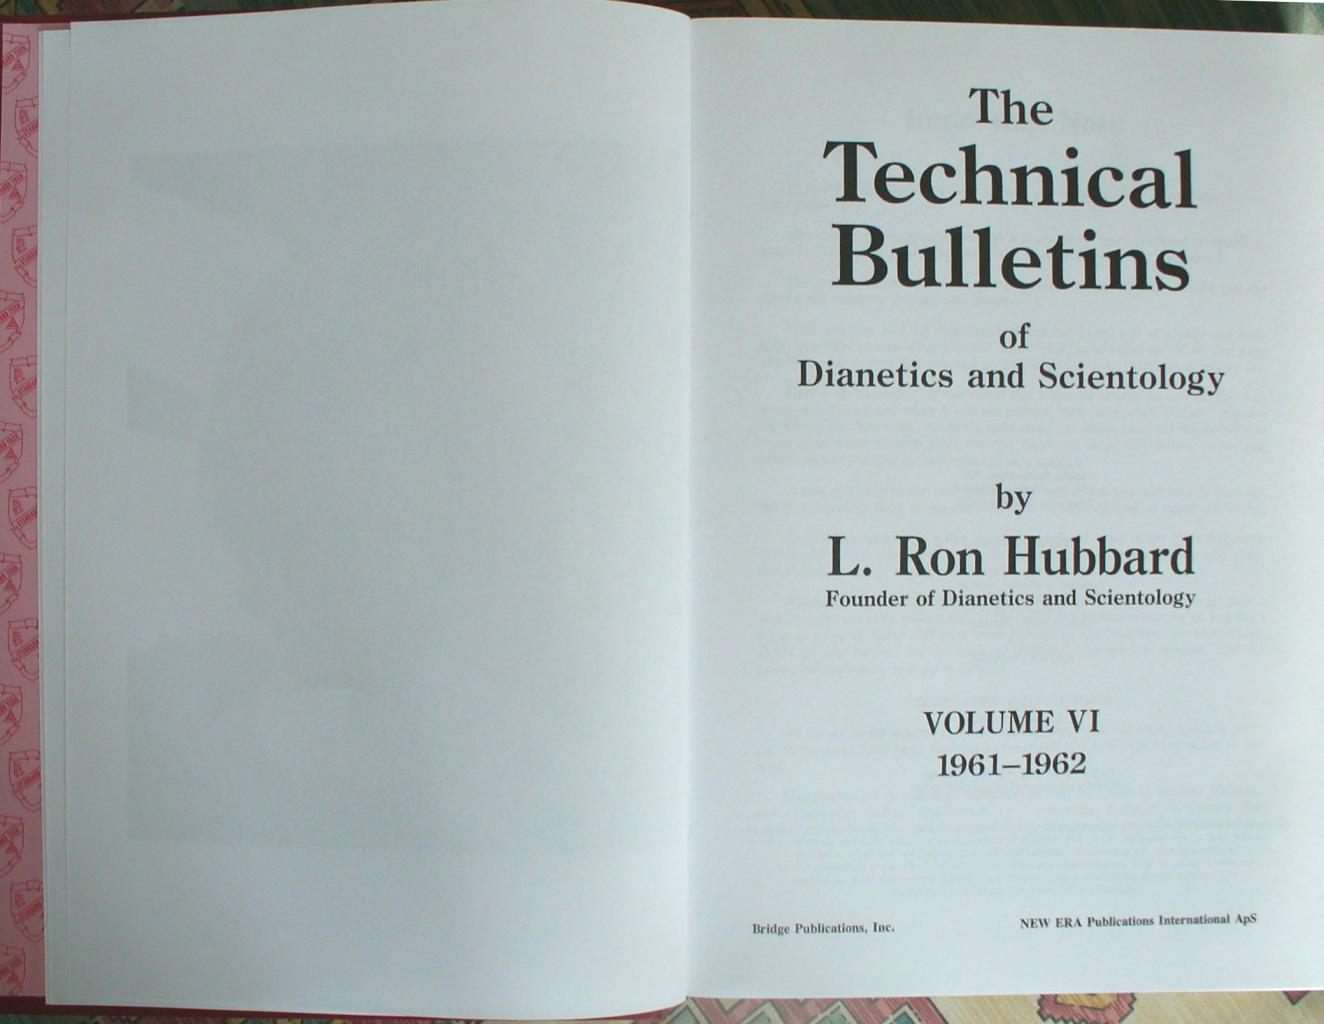 The Technical Bulletins of Dianetics and Scientology VI